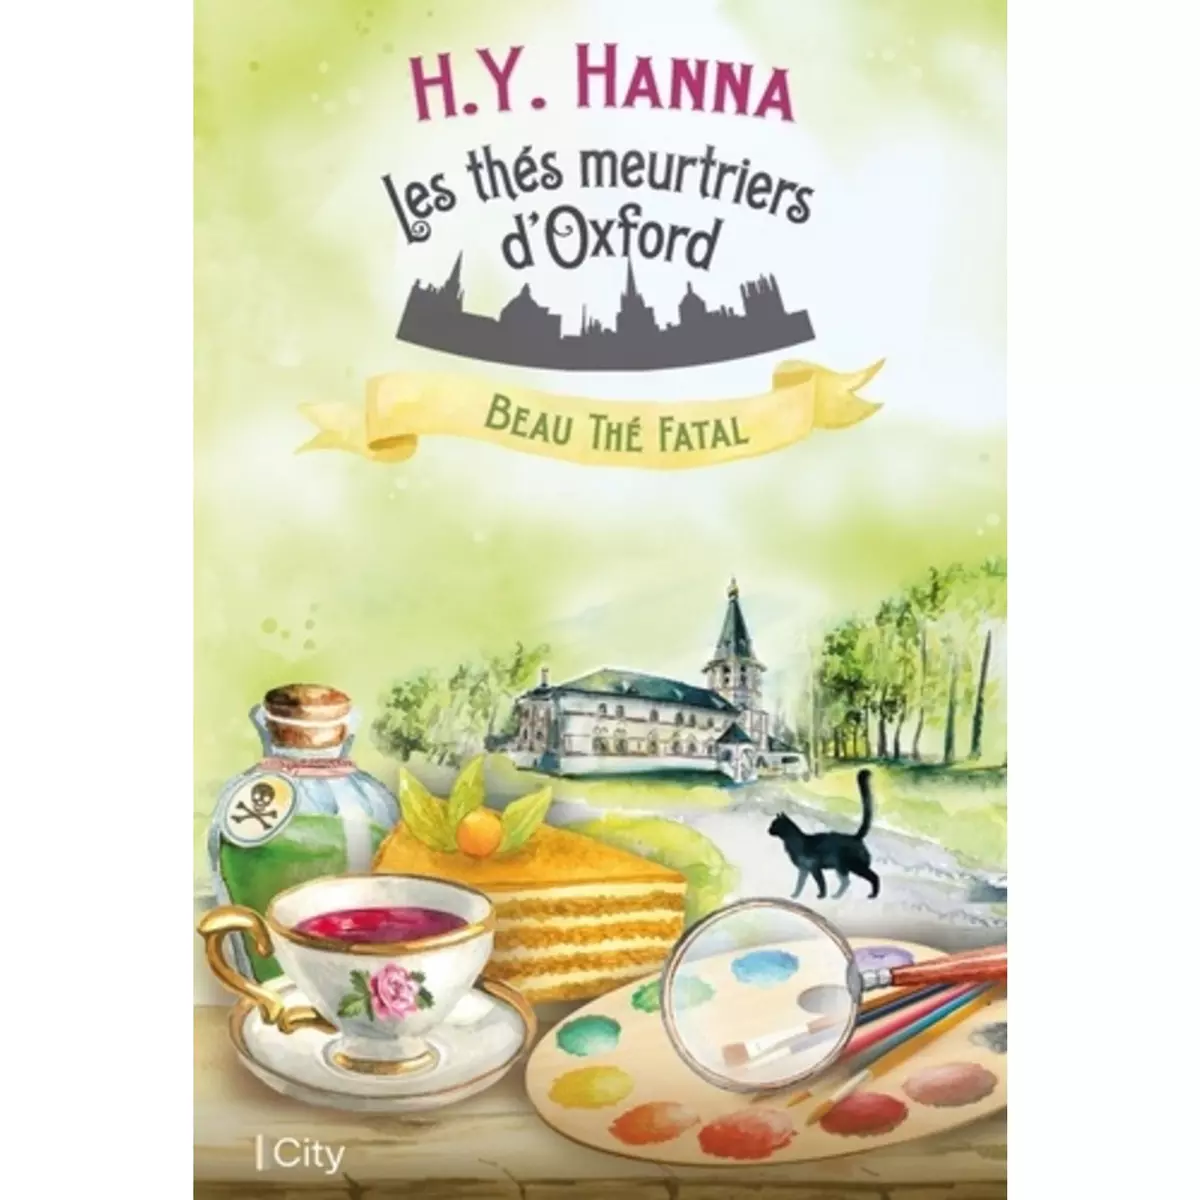  LES THES MEURTRIERS D'OXFORD TOME 2 : BEAU THE FATAL, Hanna H.Y.